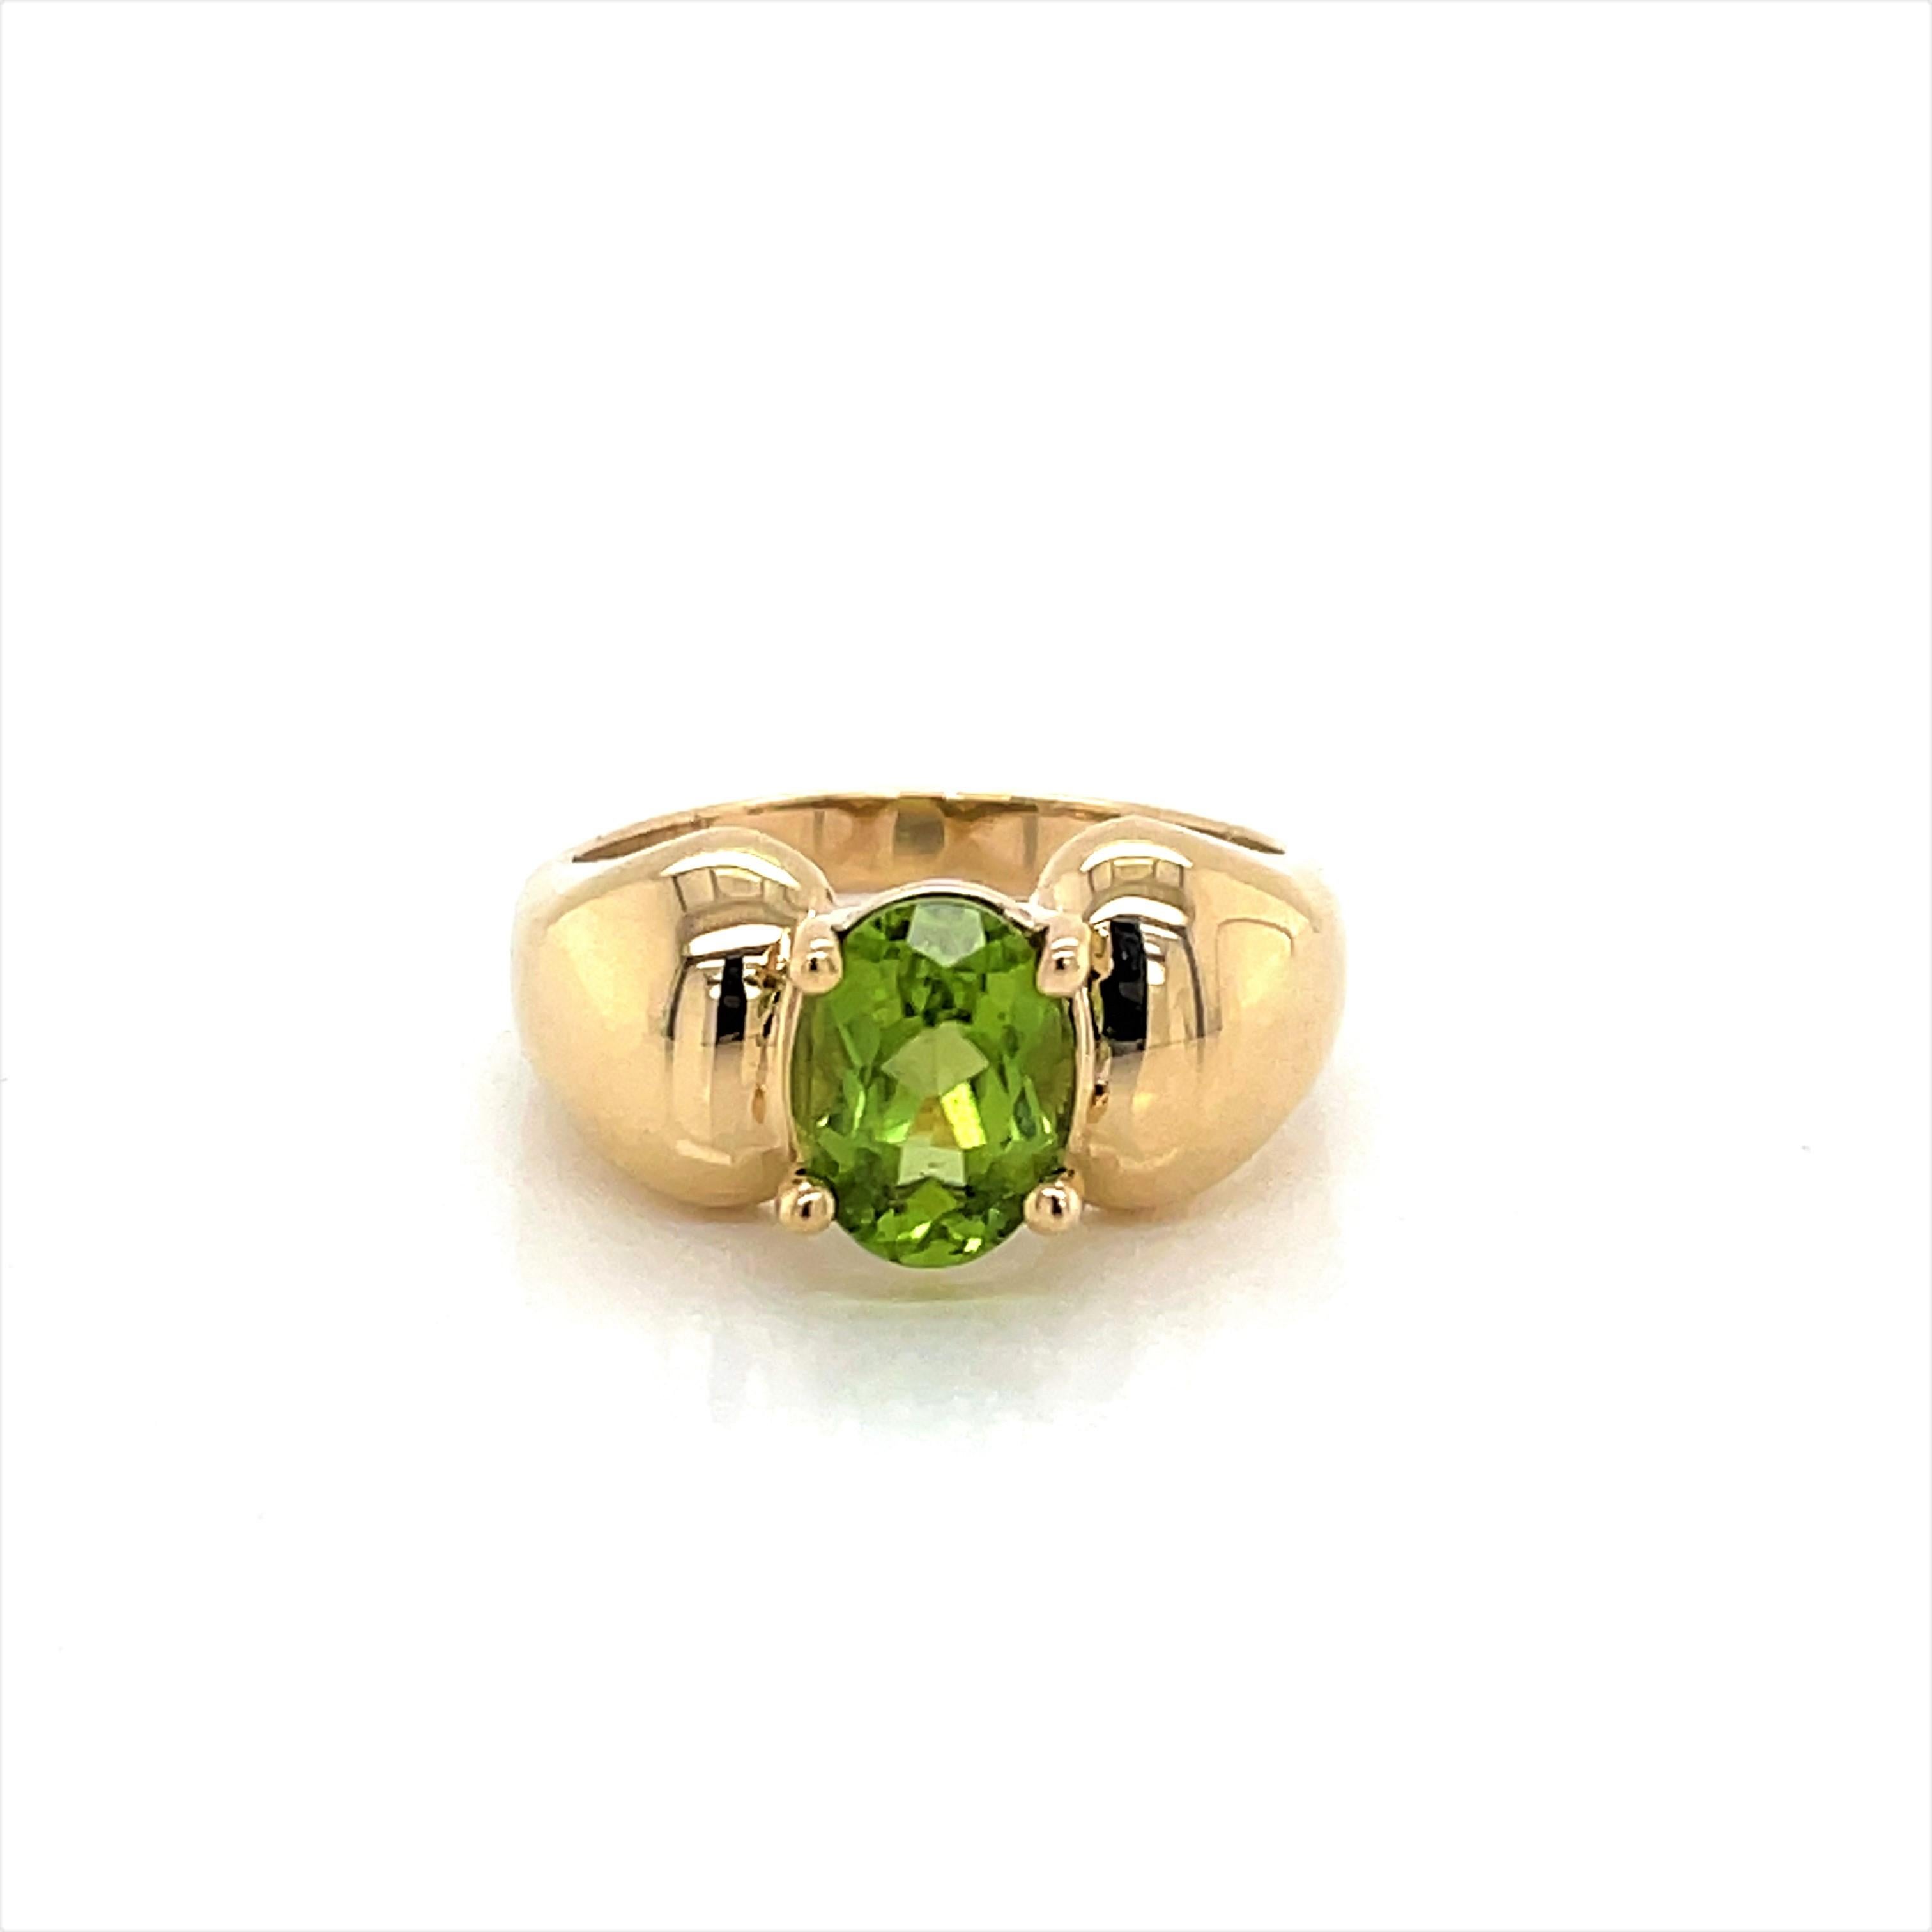 1.7 Carat Oval Peridot 10 Karat Yellow Gold Ring In Good Condition For Sale In Mount Kisco, NY